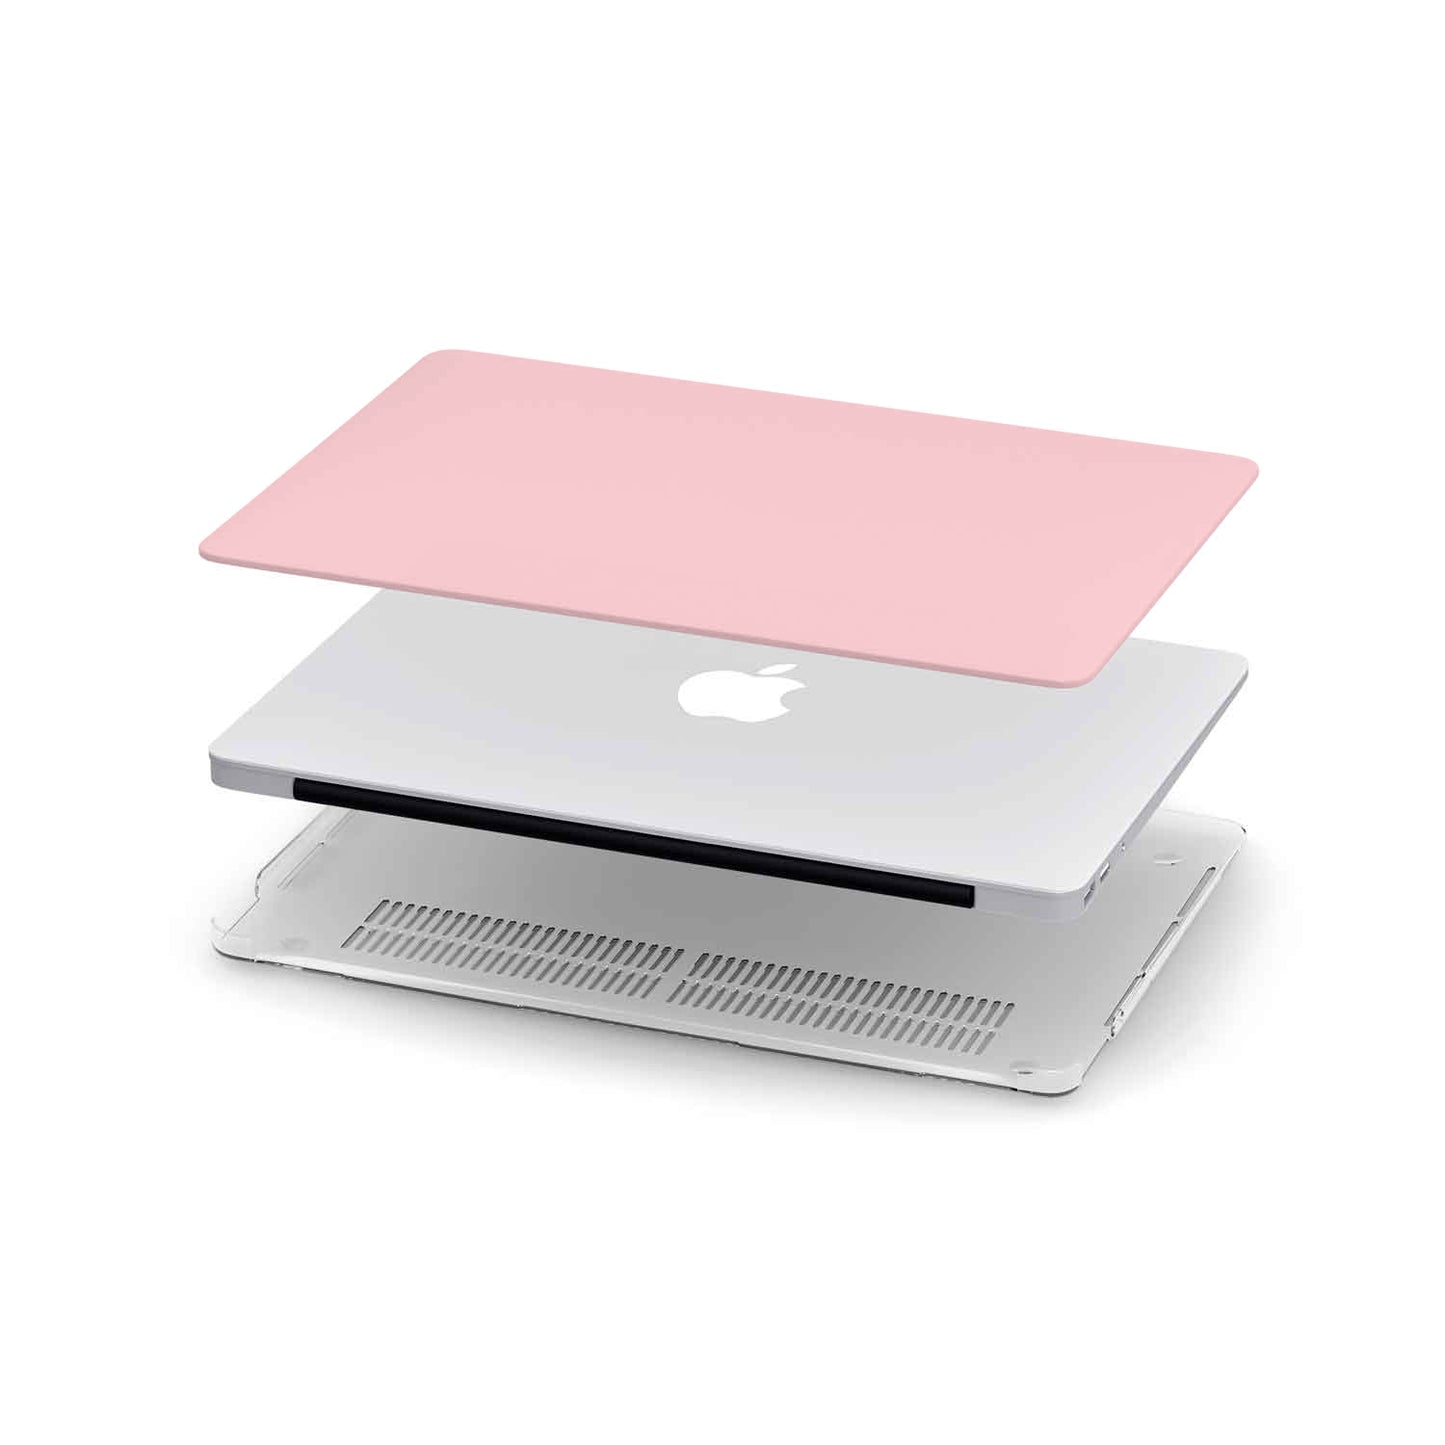 Load image into Gallery viewer, Personalized Macbook Hard Shell Case - Blush Pink
